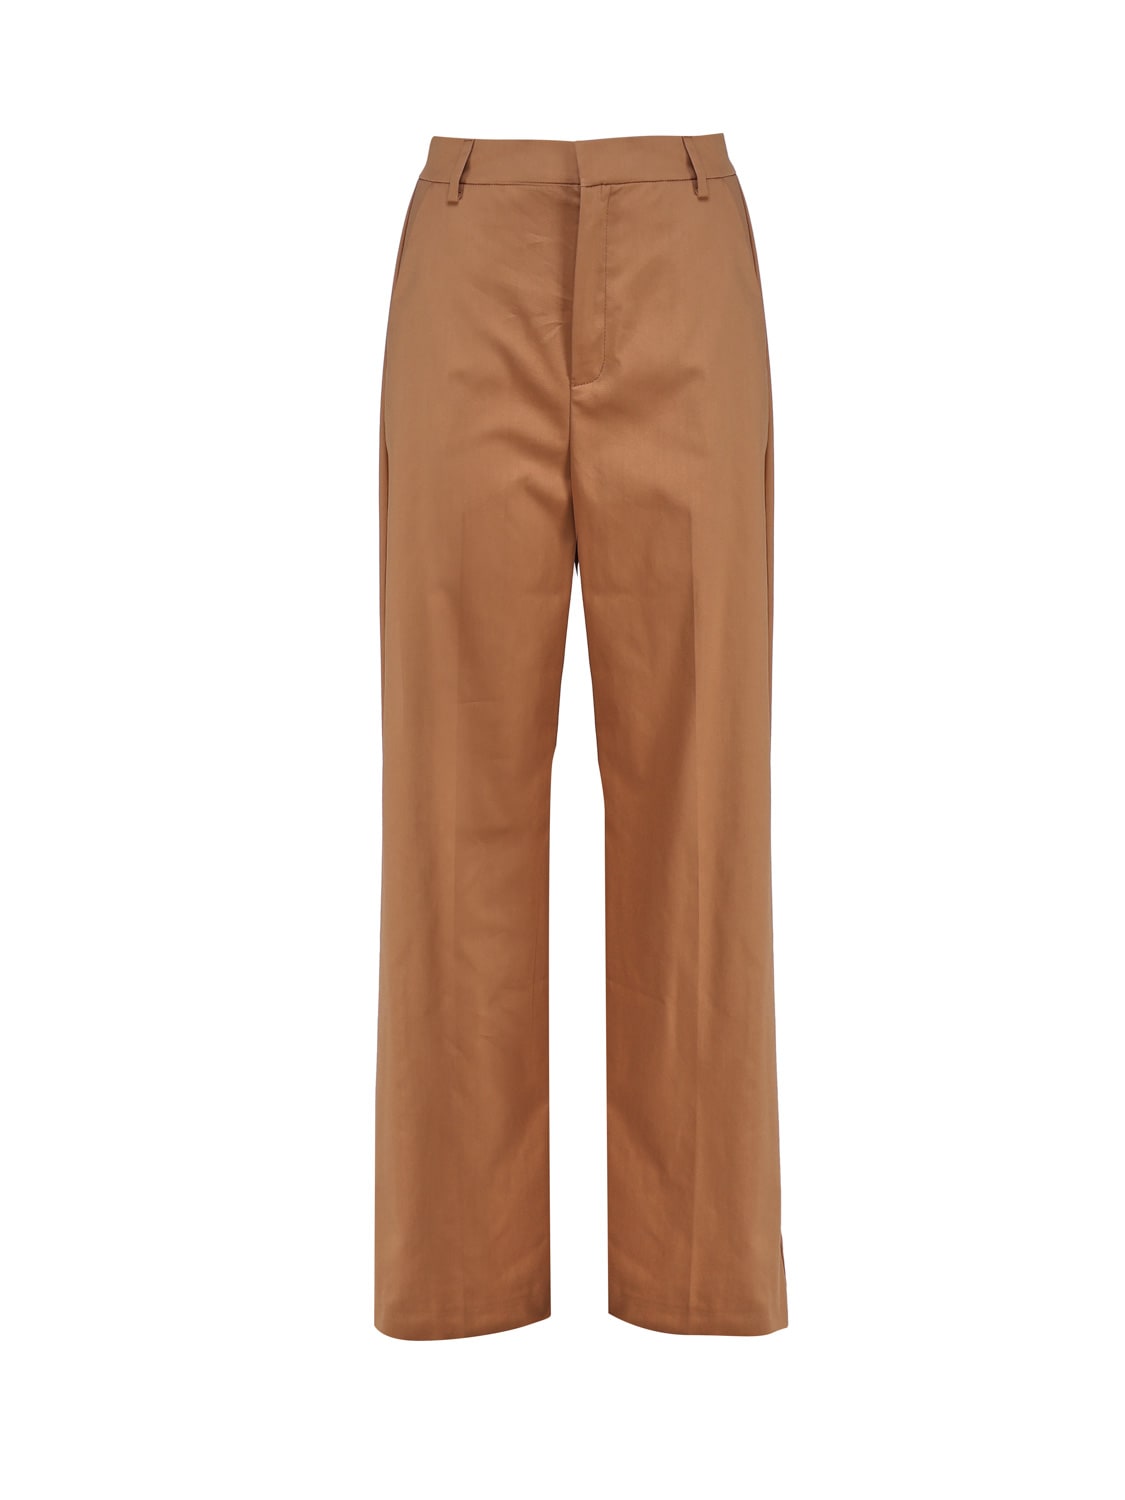 THE ANDAMANE HIGH-WAISTED COTTON TROUSERS